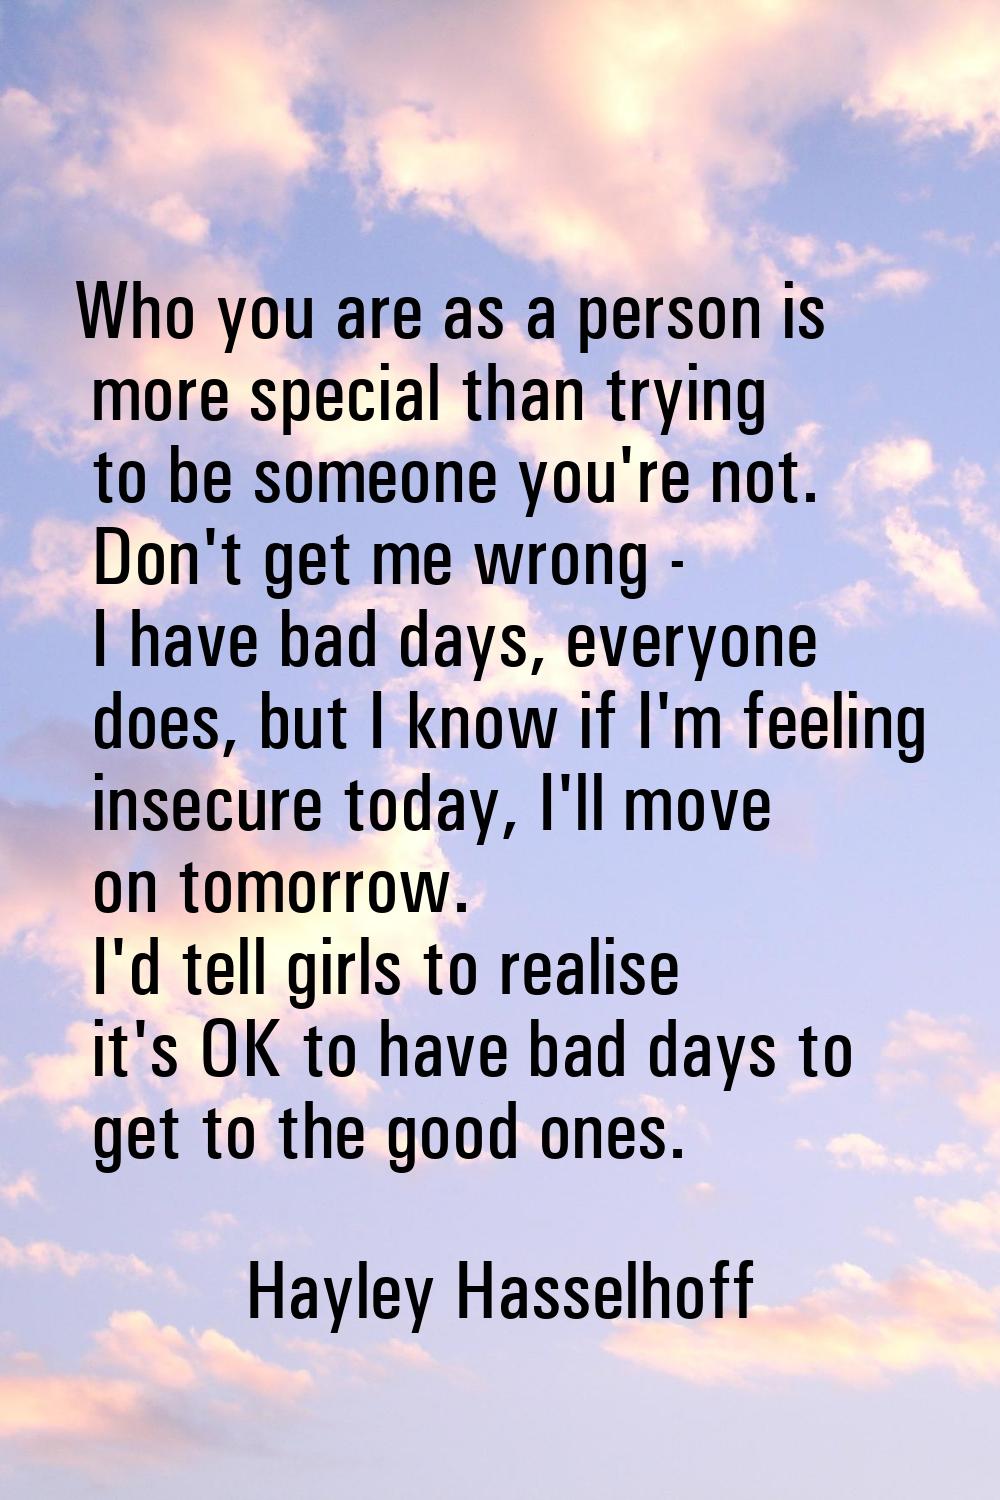 Who you are as a person is more special than trying to be someone you're not. Don't get me wrong - 